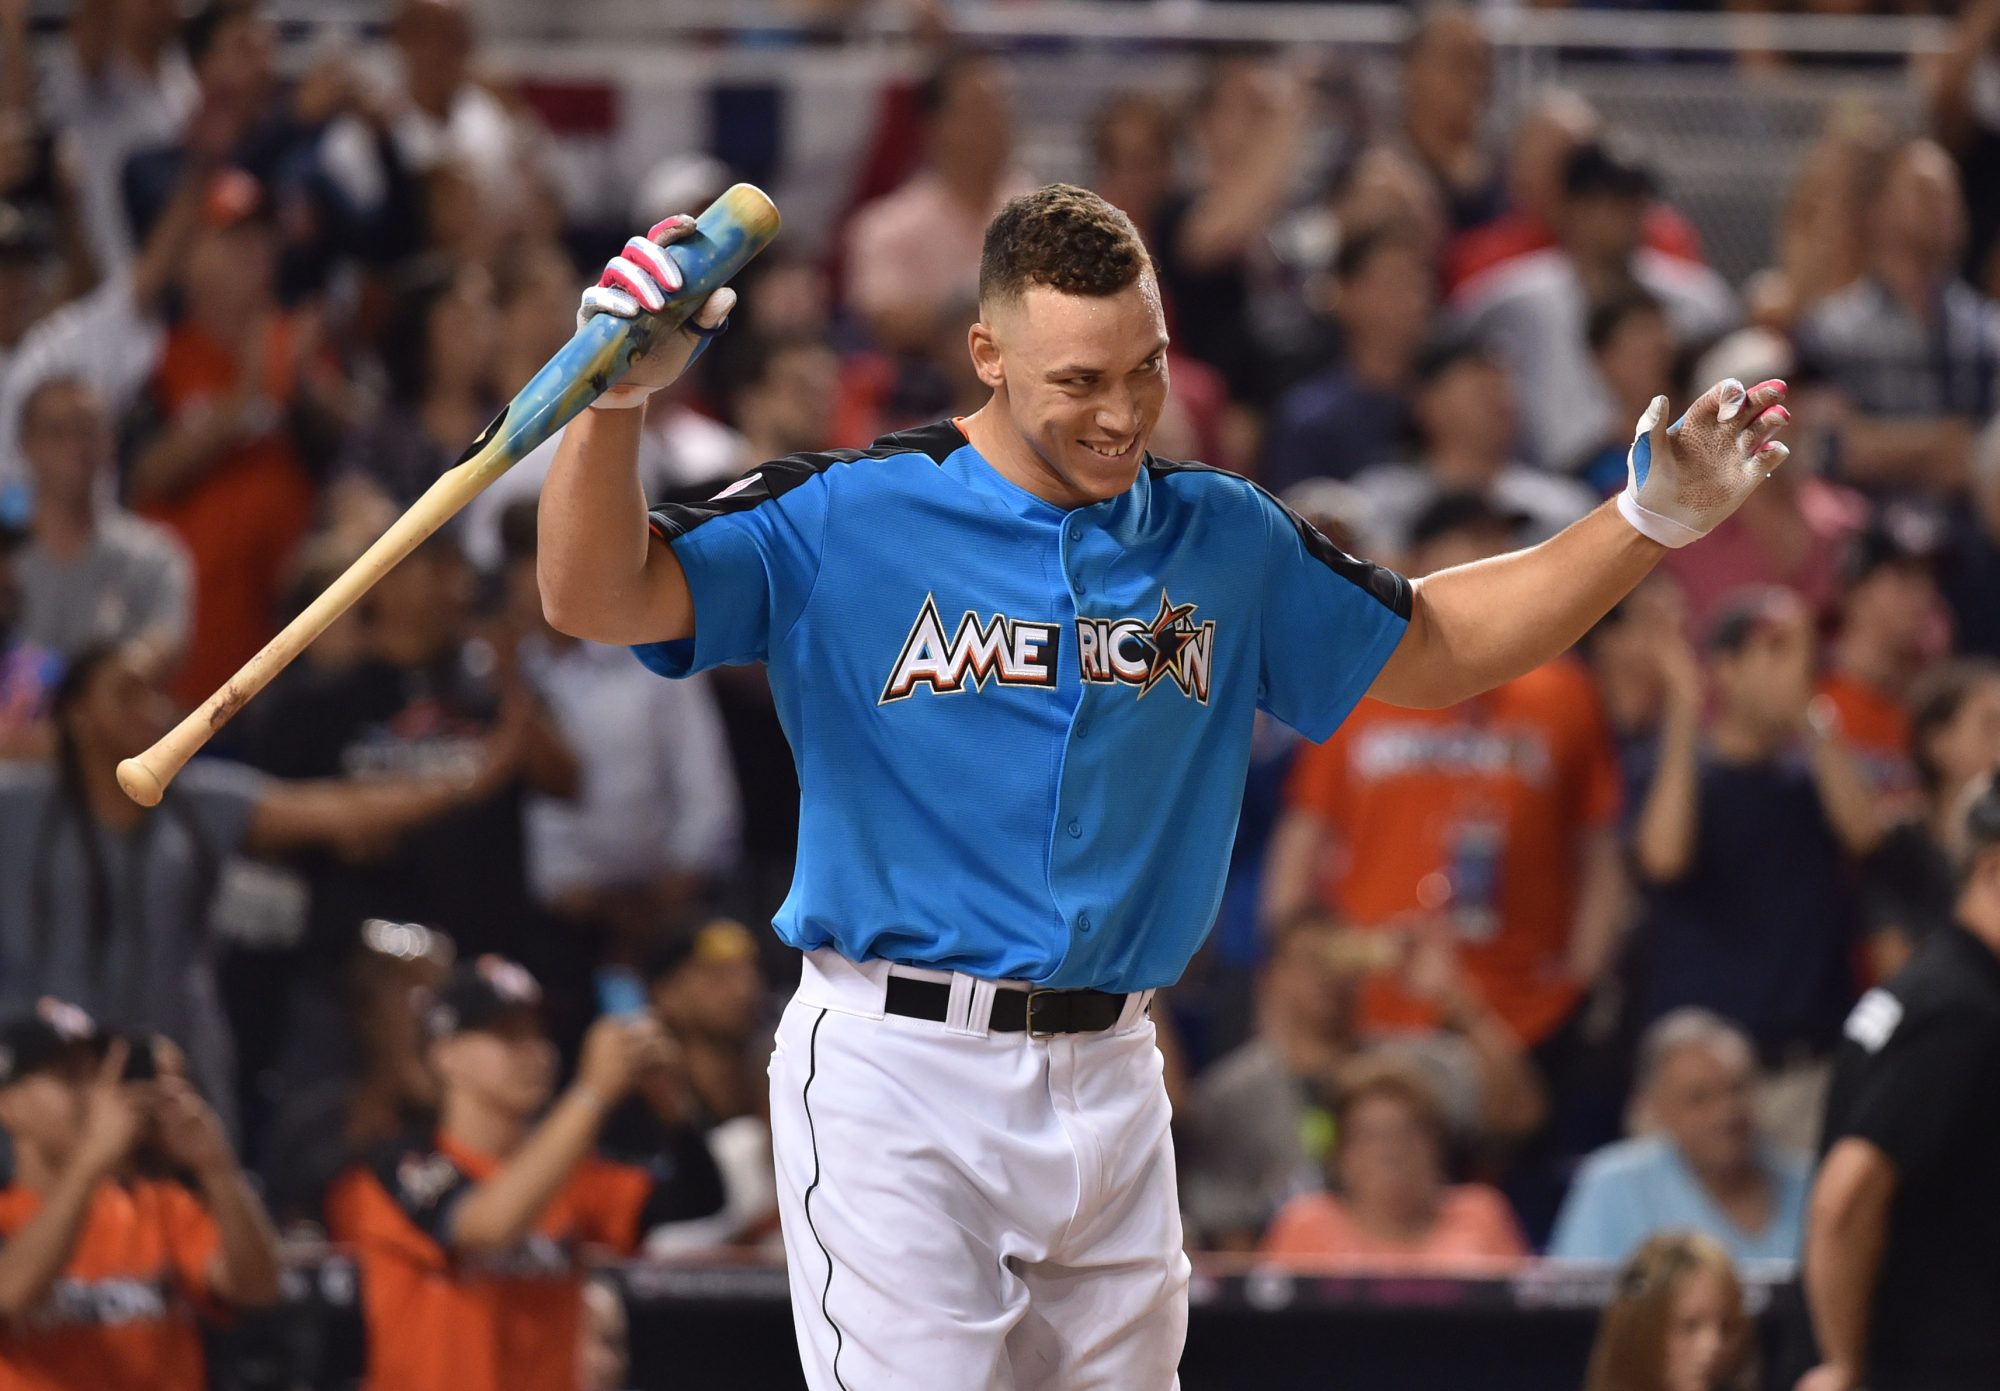 New York Yankees: Aaron Judge Wins 2017 Home Run Derby With Ease (Highlights) 2